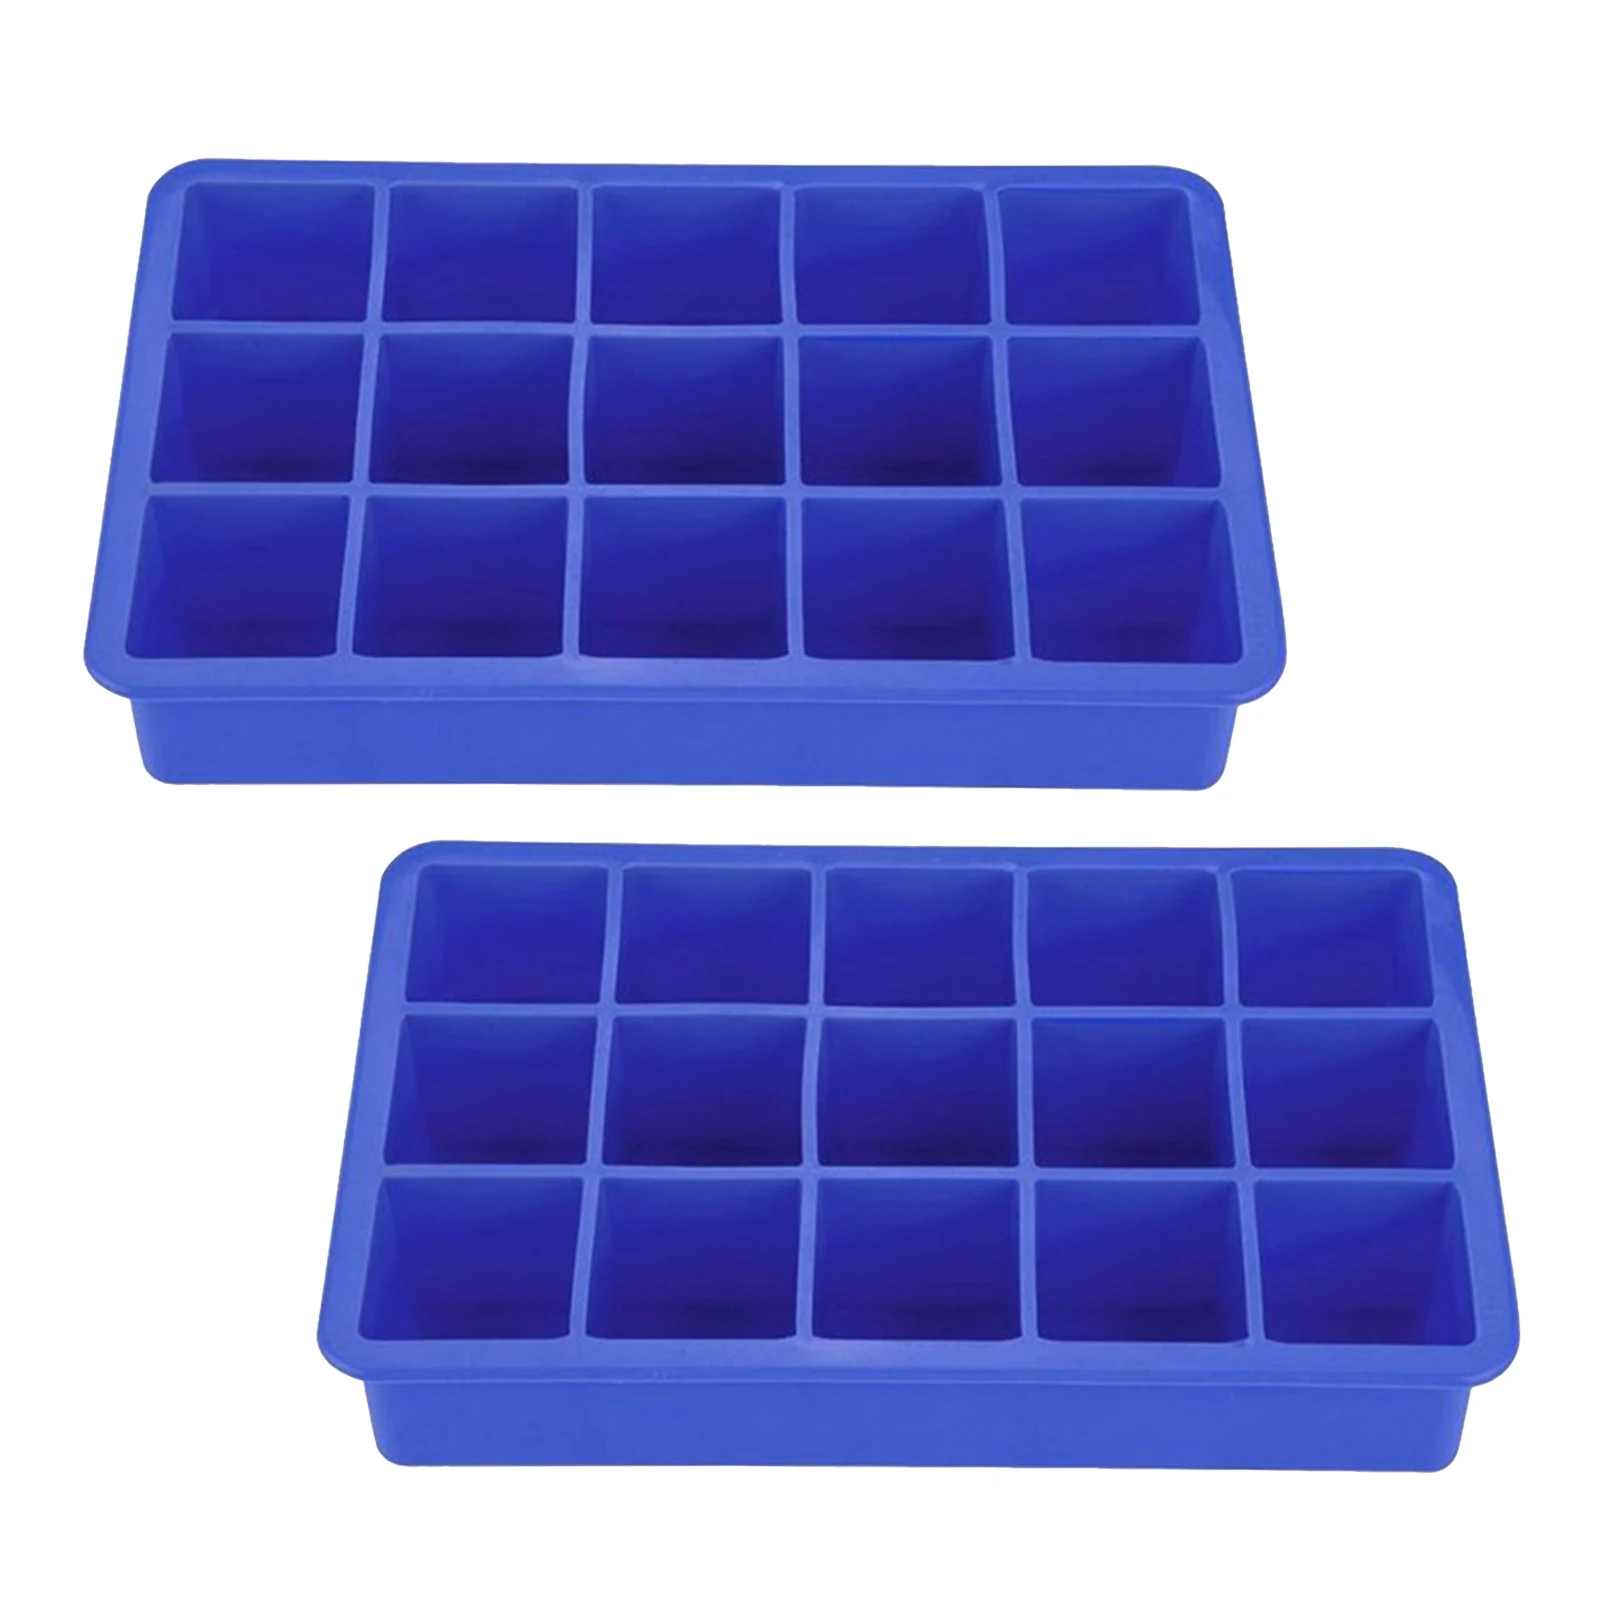 

2pcs Drink Mold For Freezer Cocktails Flexible 15 Cavity Ice Cube Tray Party Home Kitchen Whiskey Bar Soft Silicone Easy Release